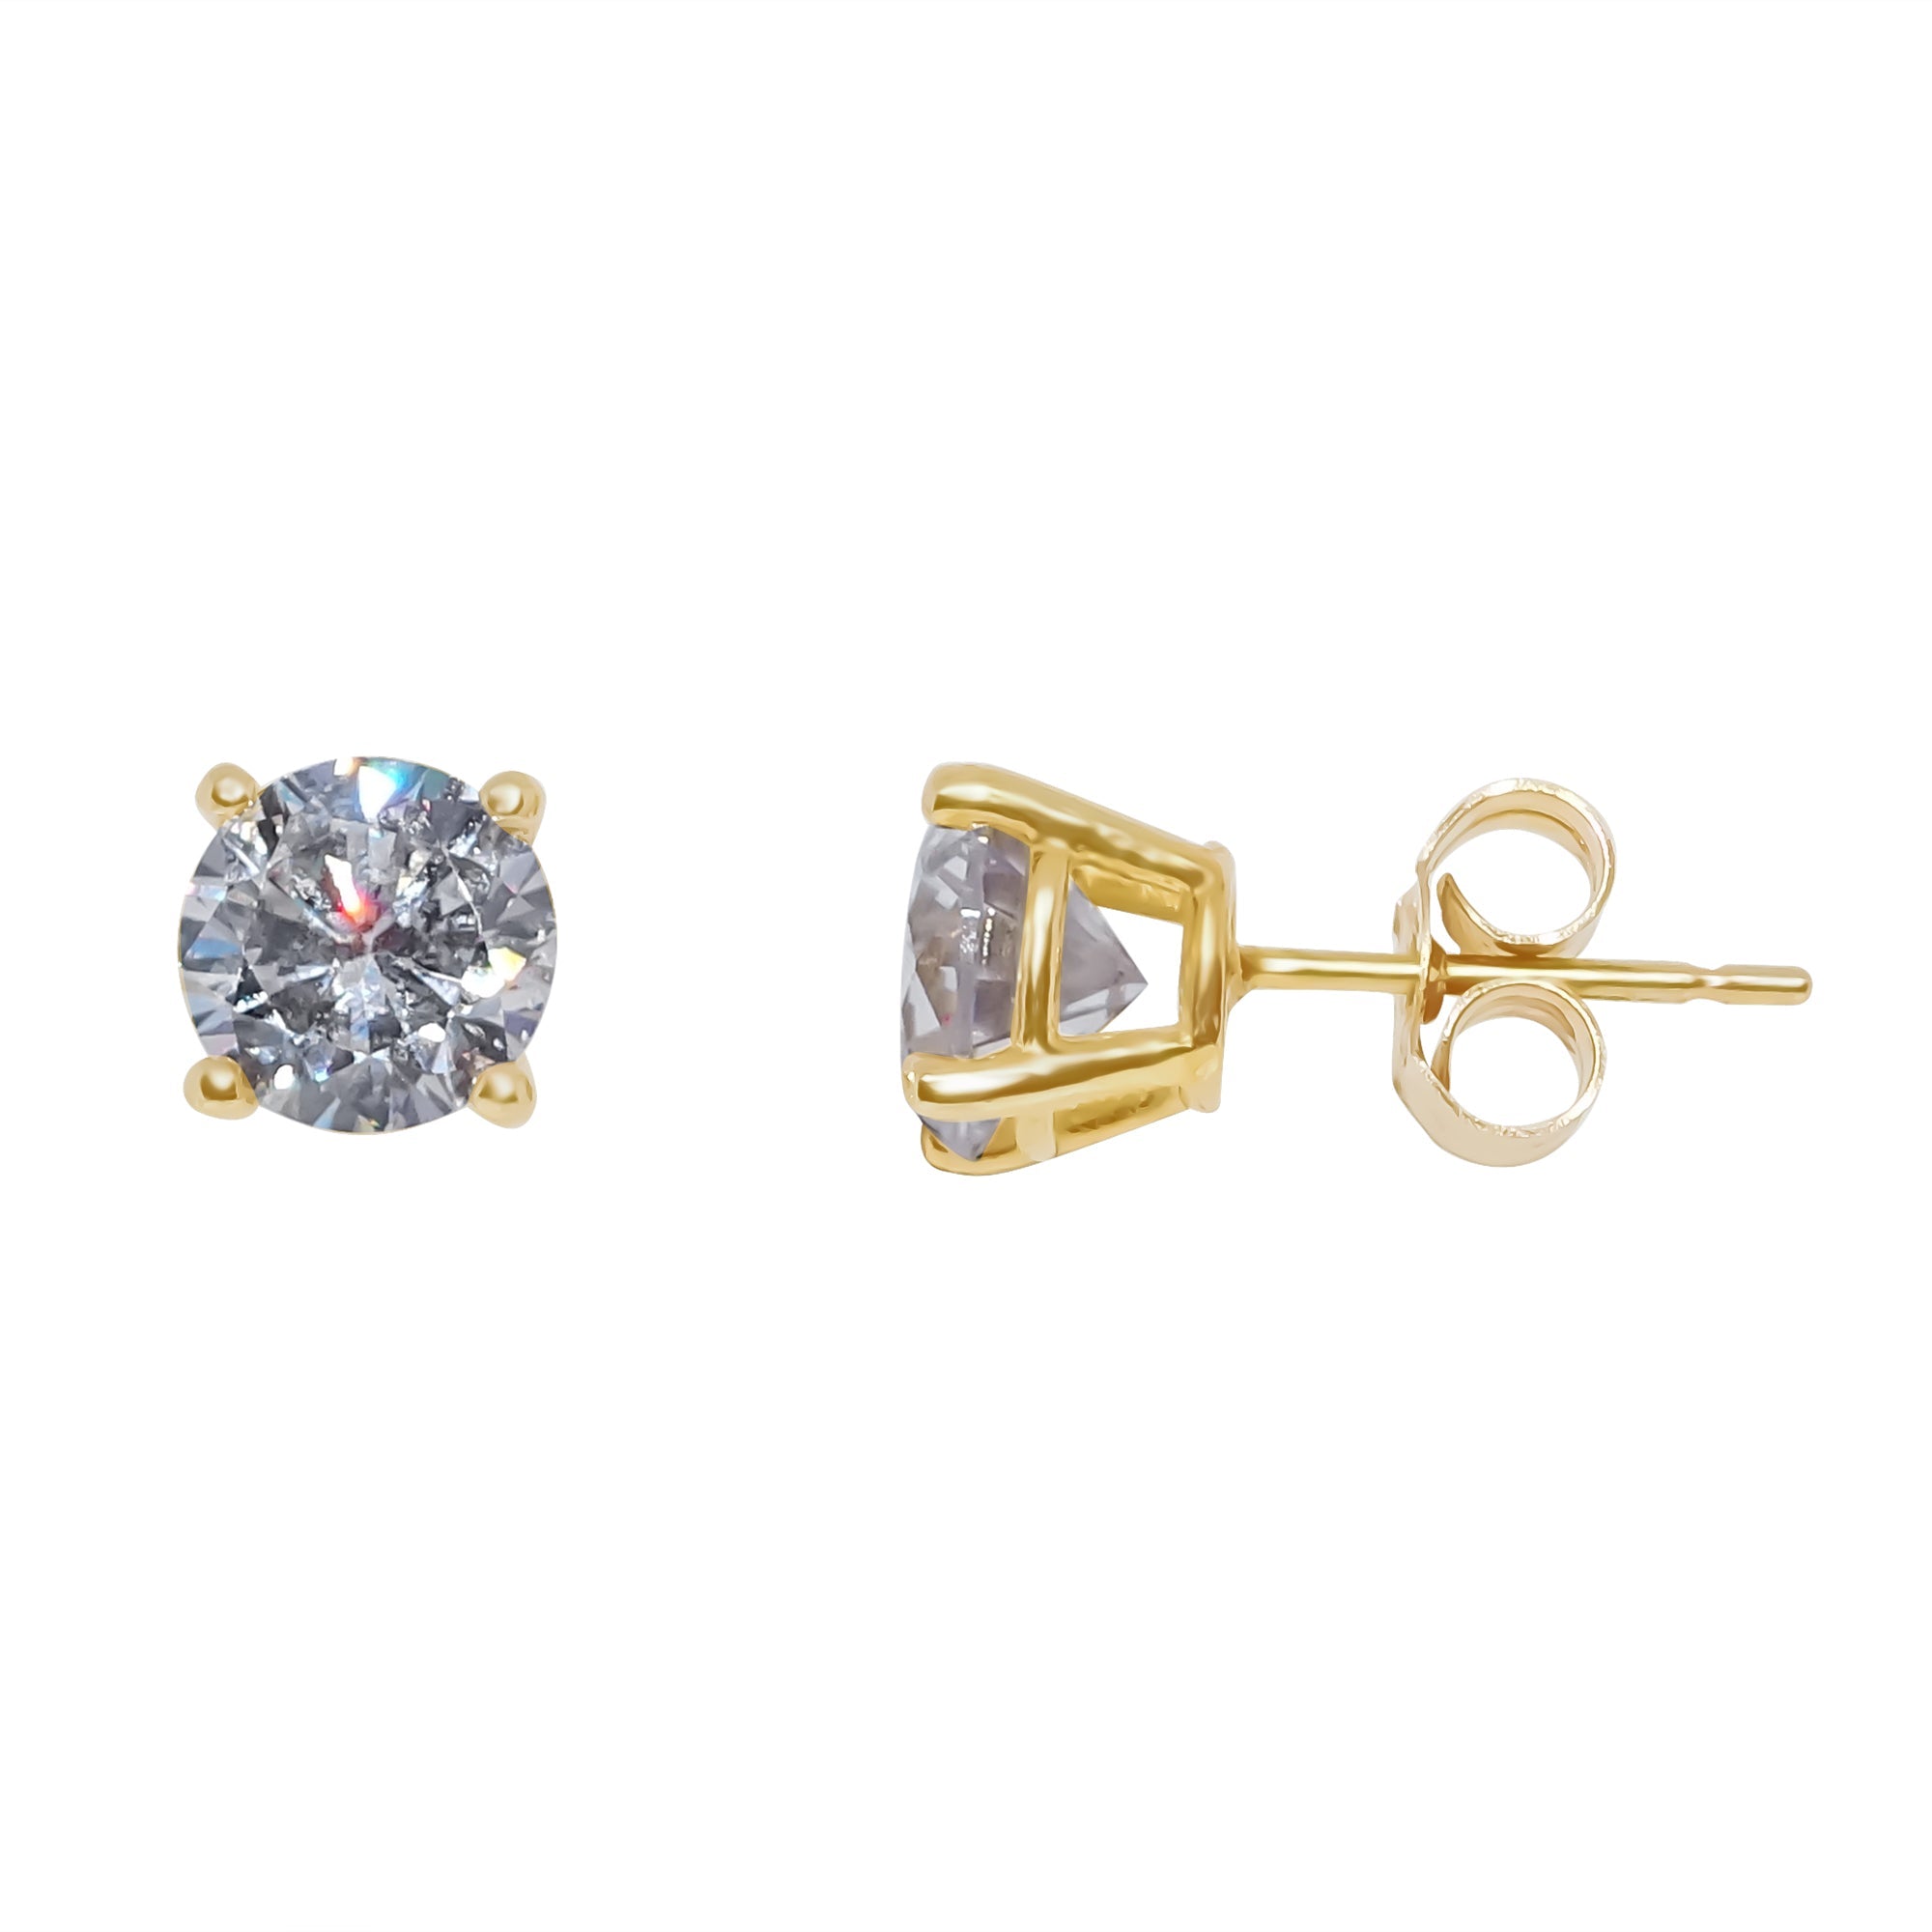 9ct gold 6mm round cz stud earrings